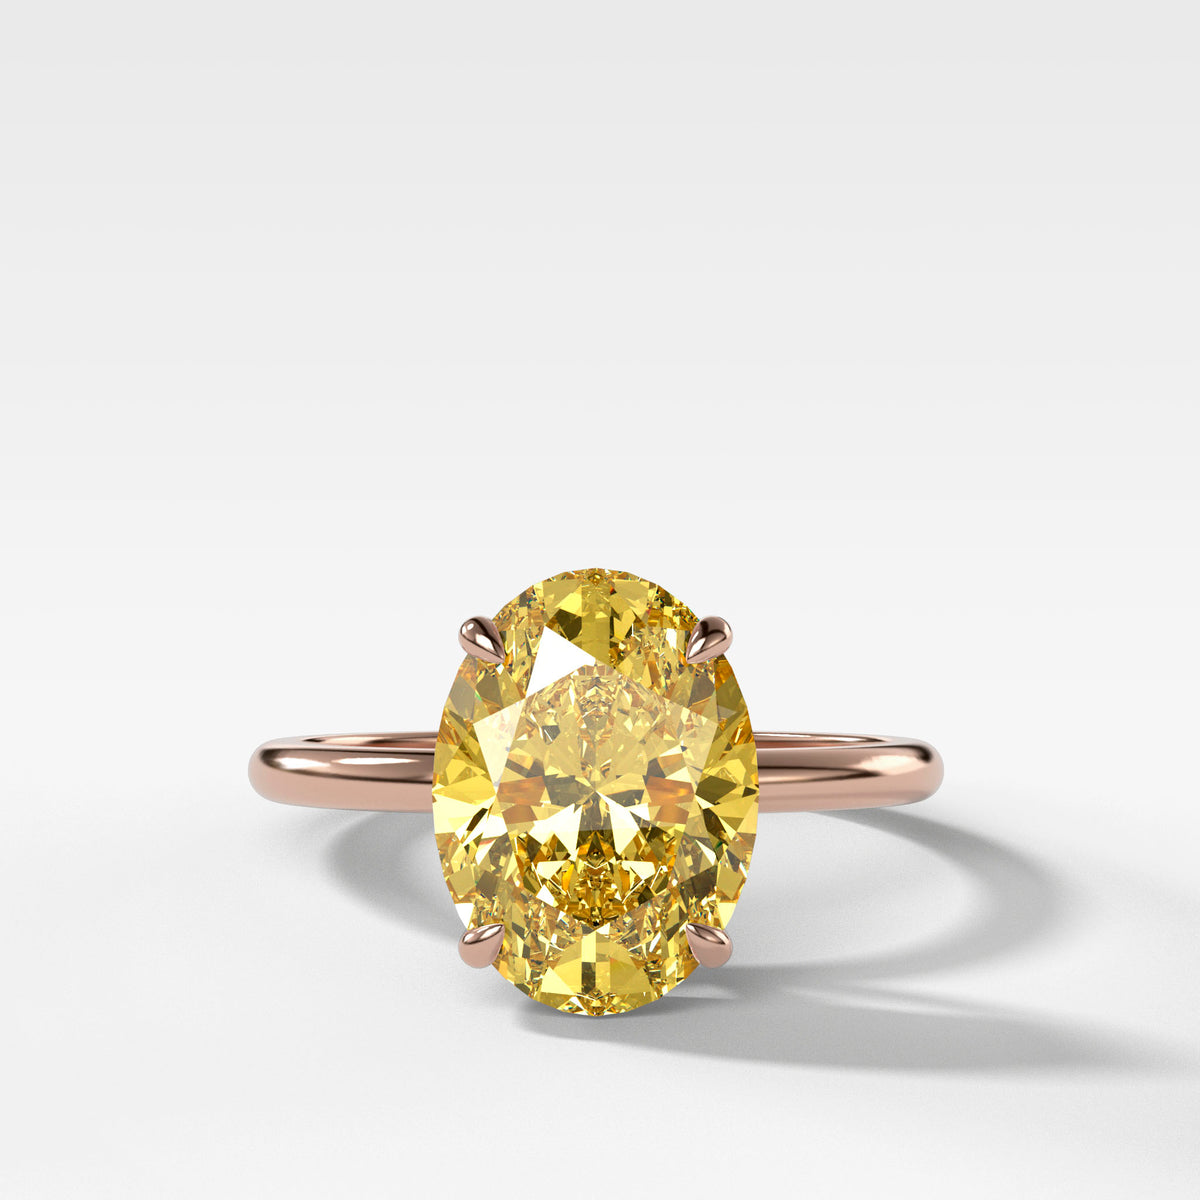 Thin + Simple Solitaire Engagement Ring With Canary Yellow Oval Cut Diamond